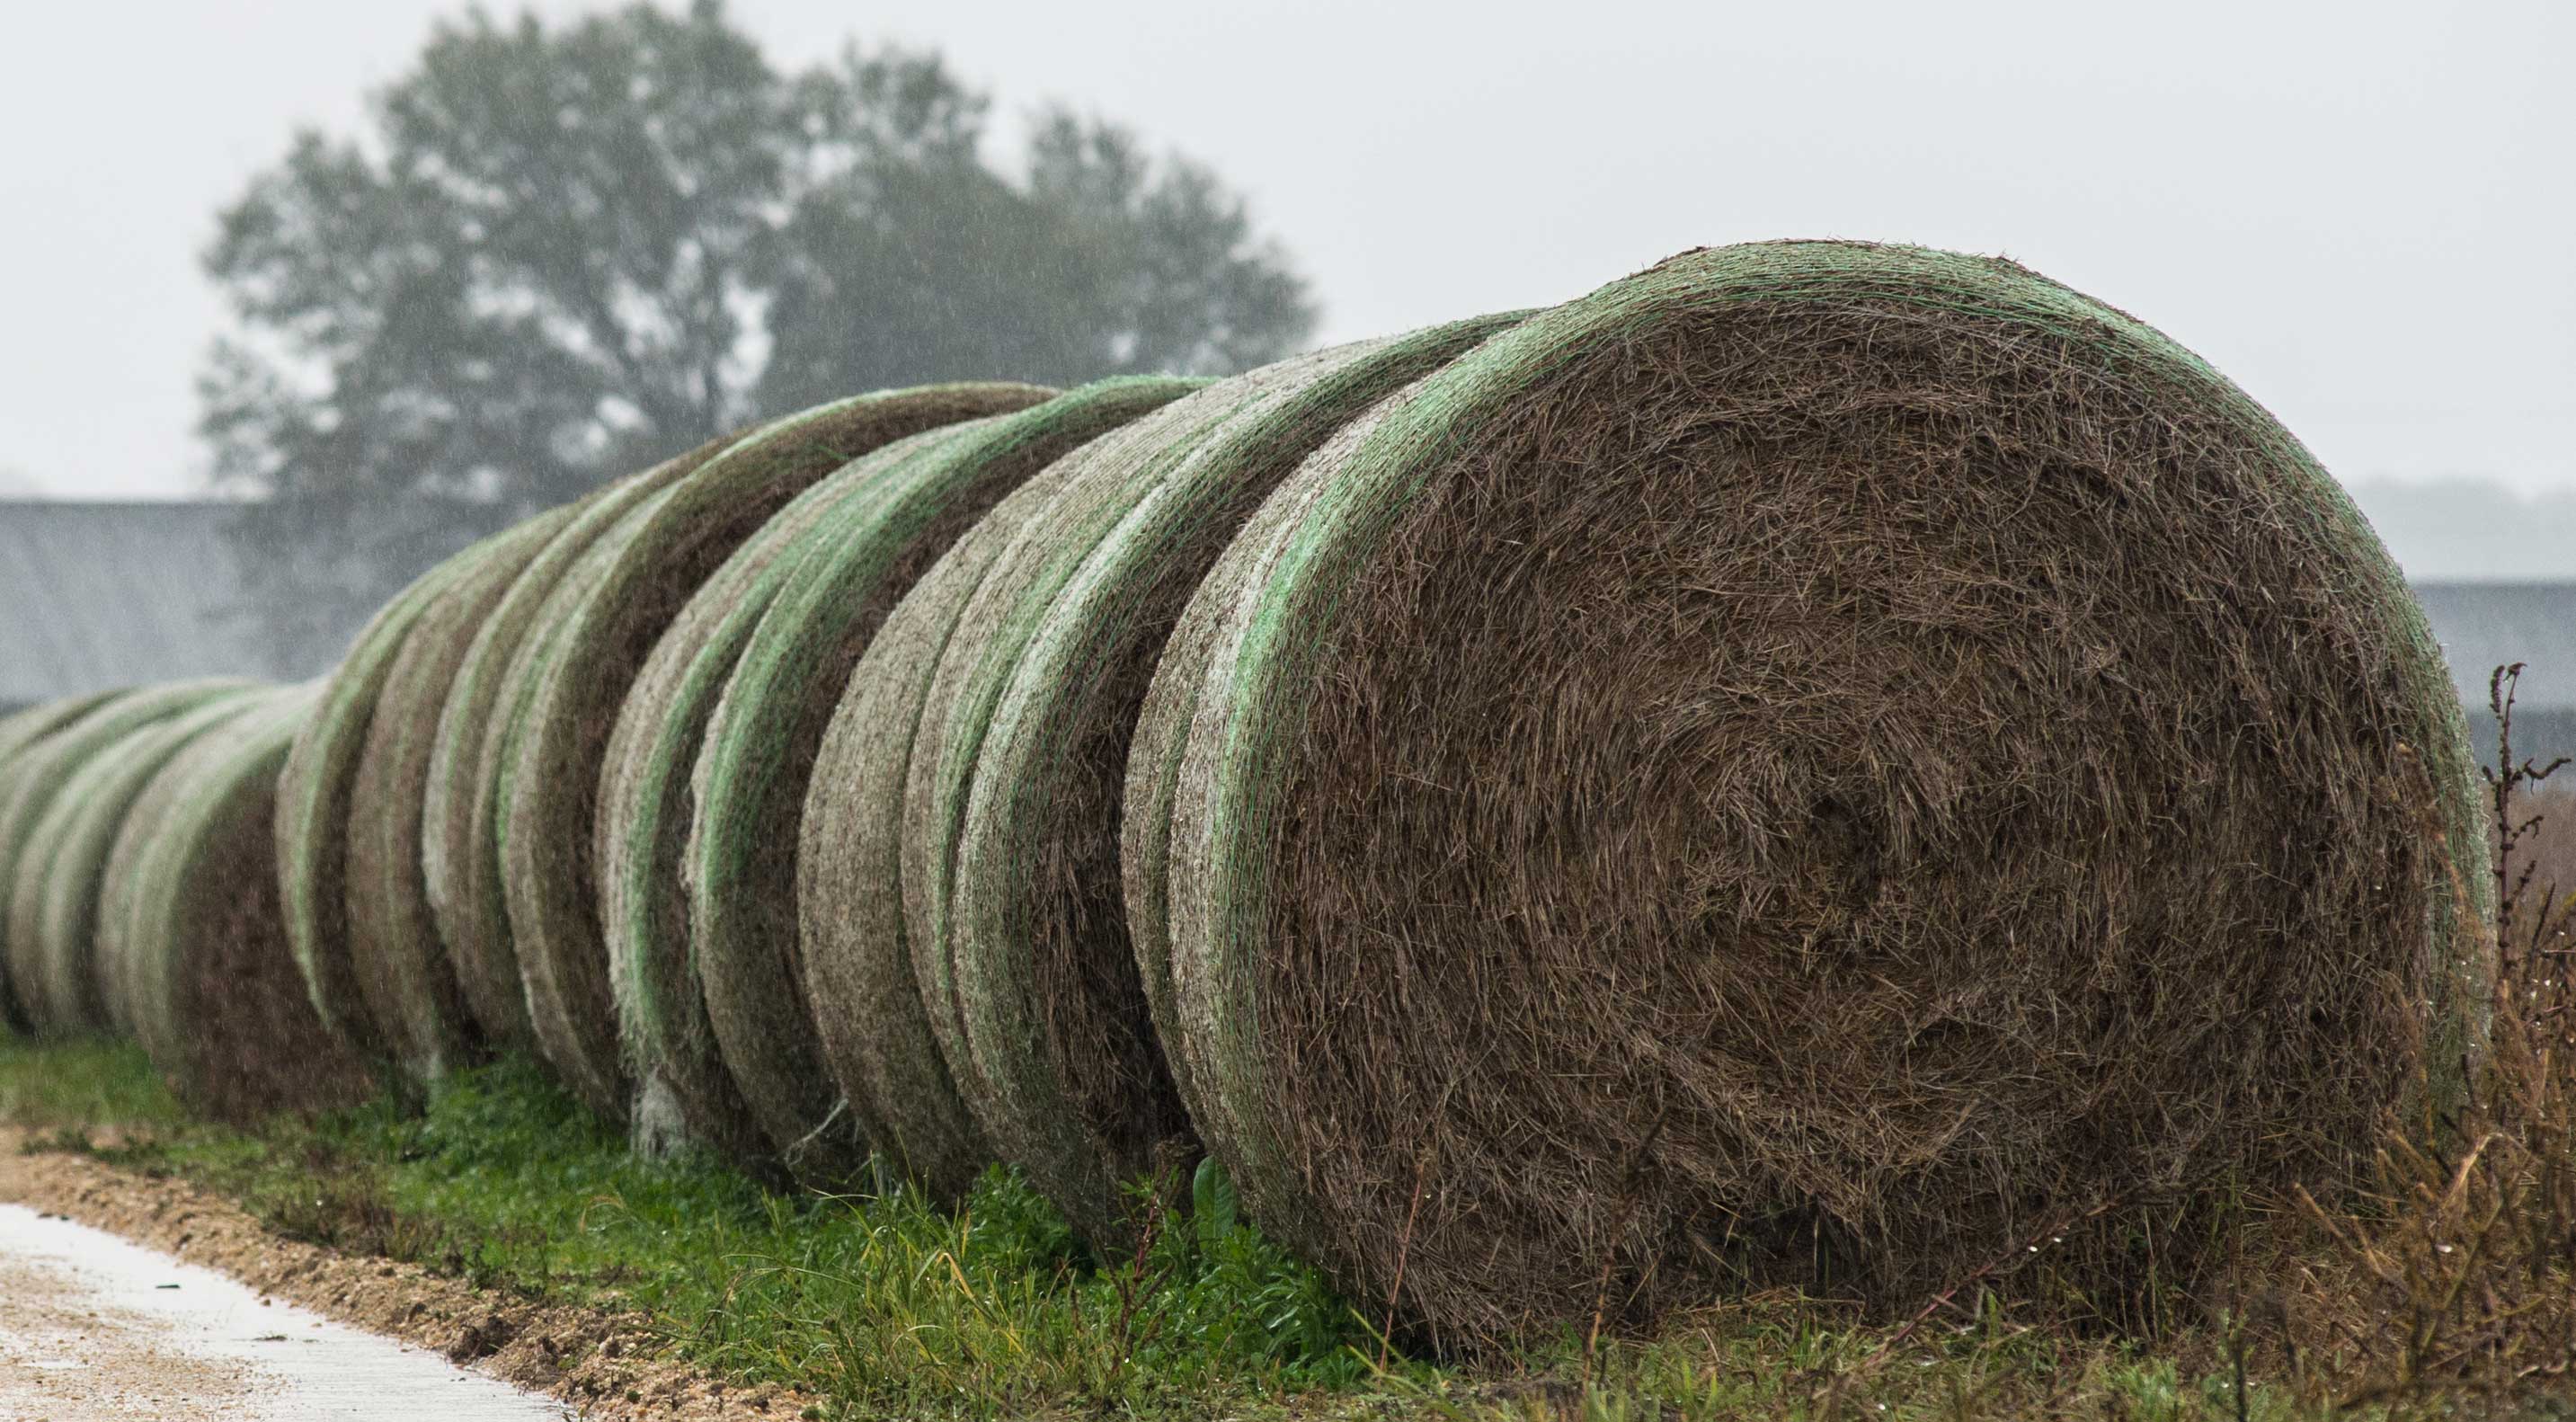 Several wrapped bales of hay lined up near a barn.